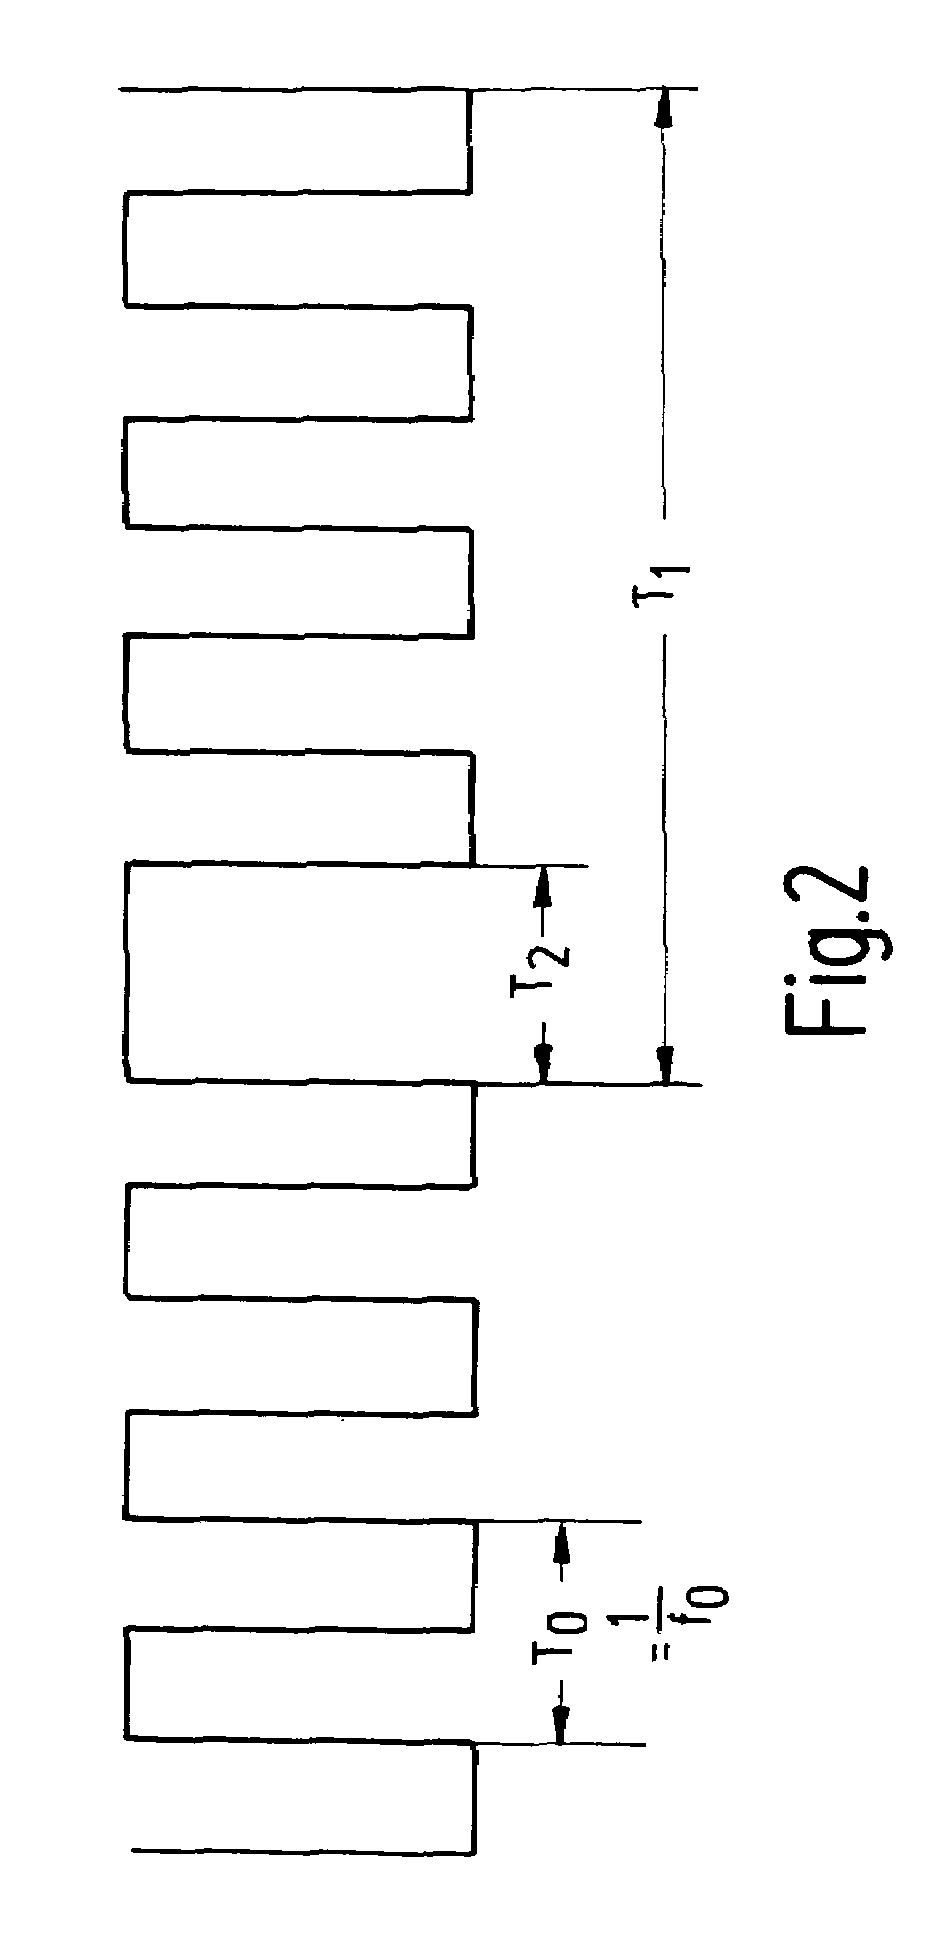 Method and device for measuring the rotational speed of a pulse-activated electric motor based on a frequency of current ripples